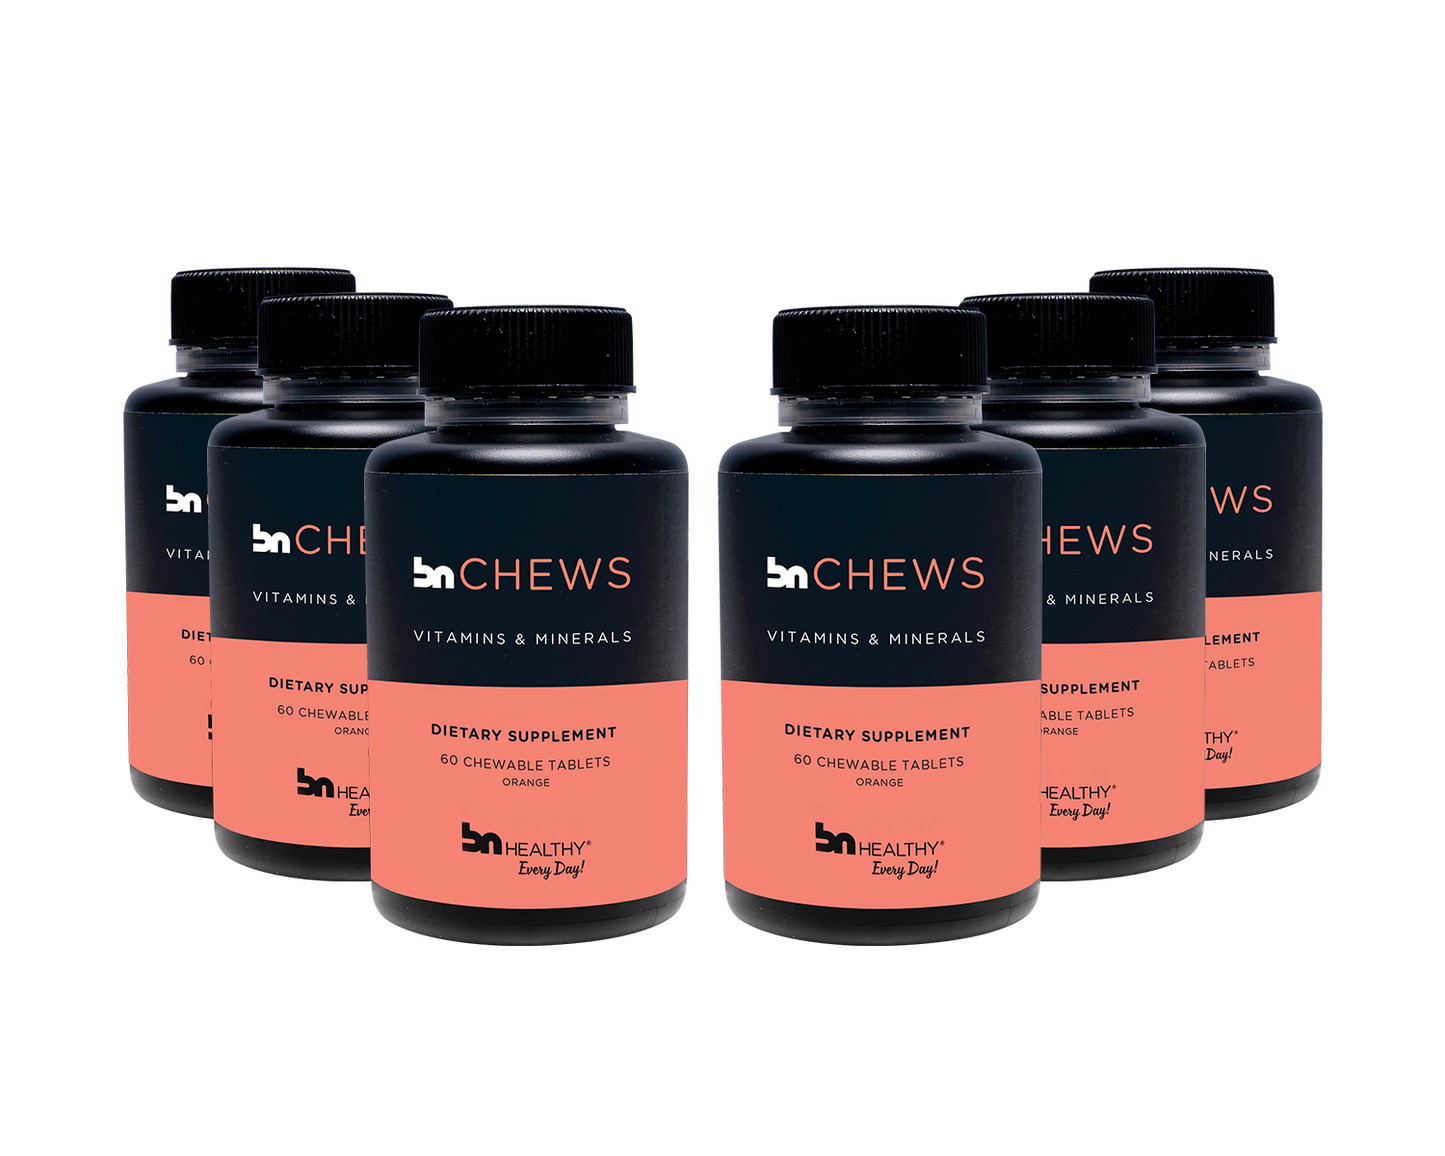 BN Chews - Chewable Multivitamins - 6 Month Subscription - Save 20%